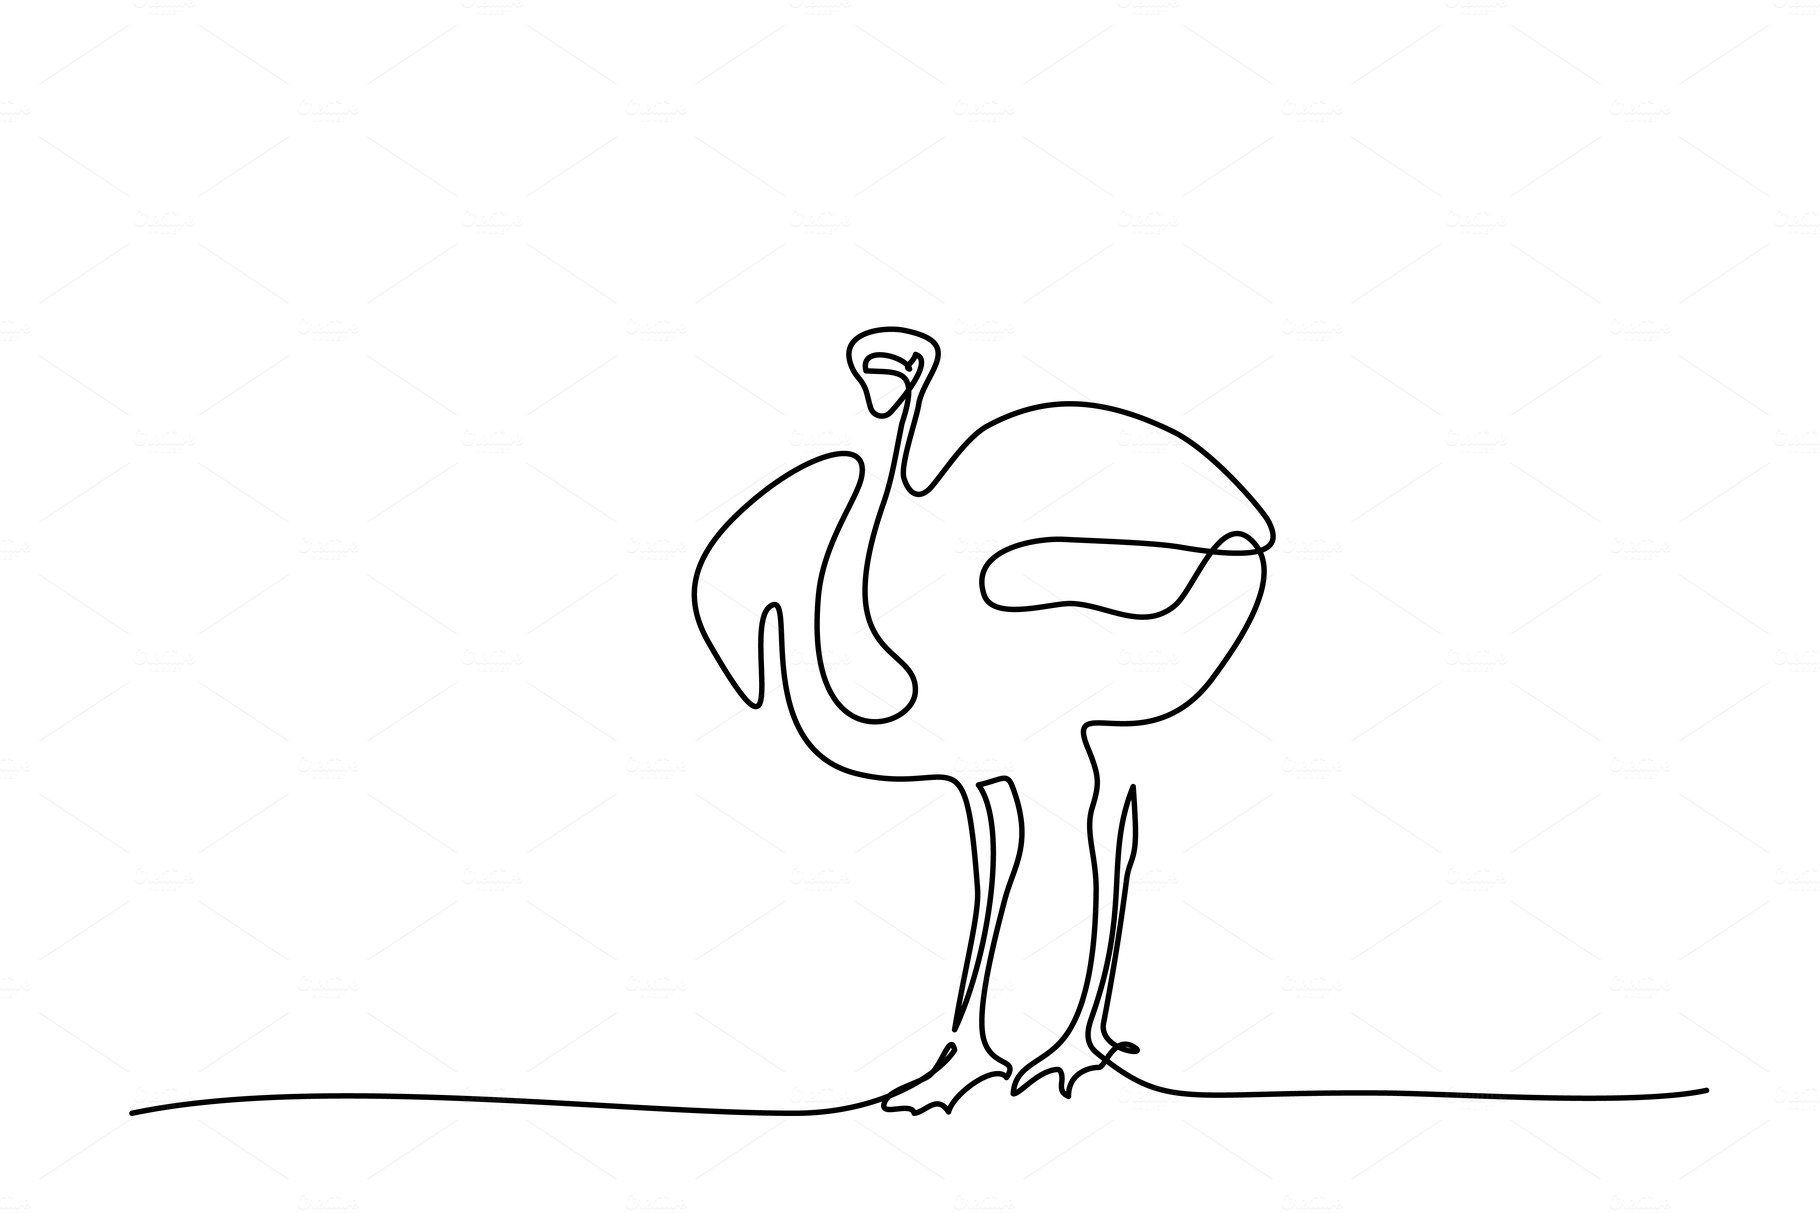 Ostrich walking symbol cover image.